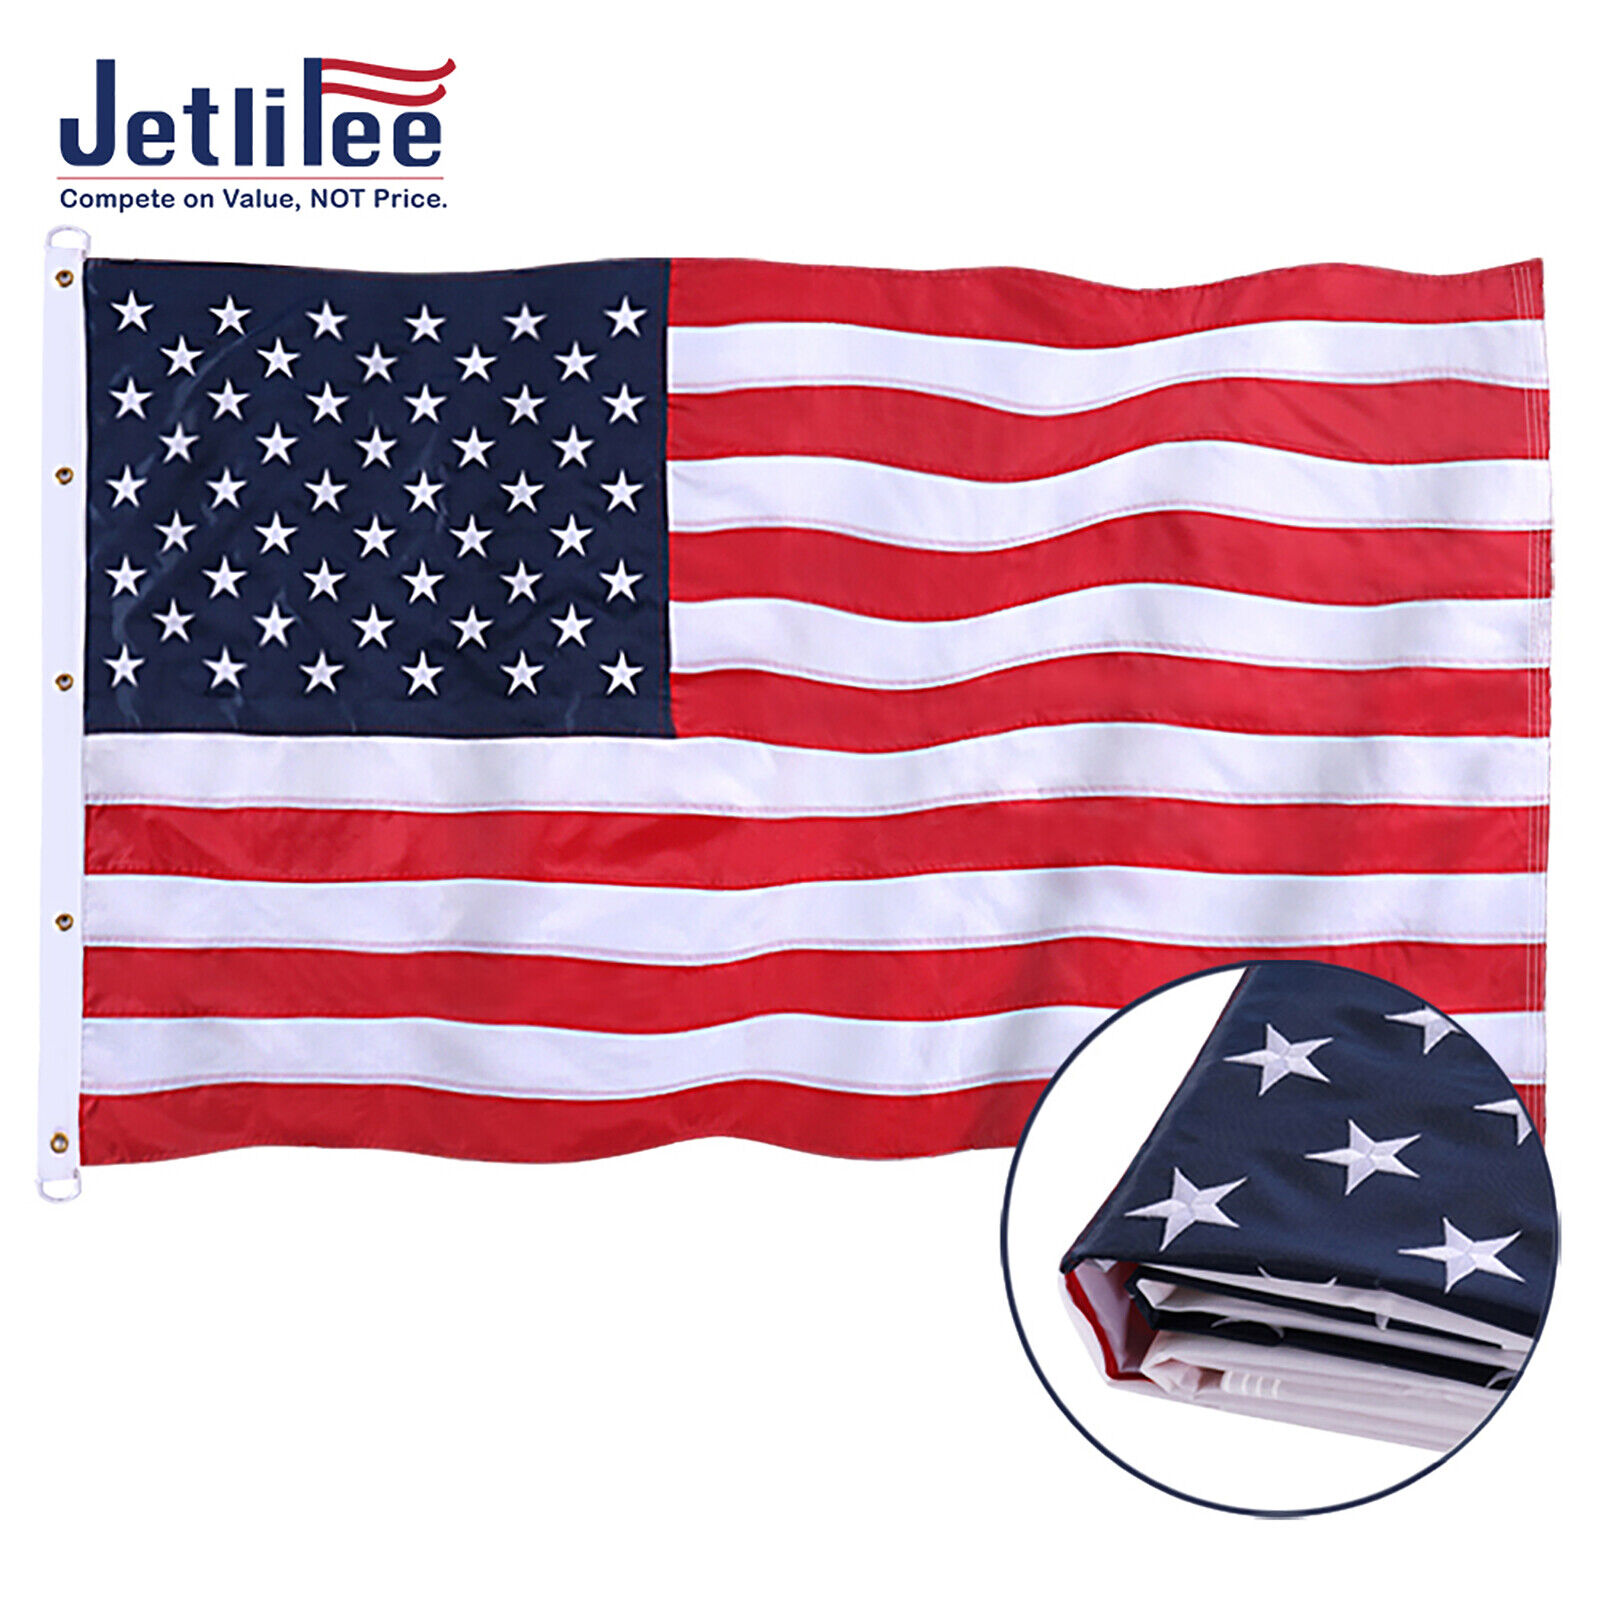 Large American Flag 10x15 ft 420D UV Protected Embroidered US USA Flag